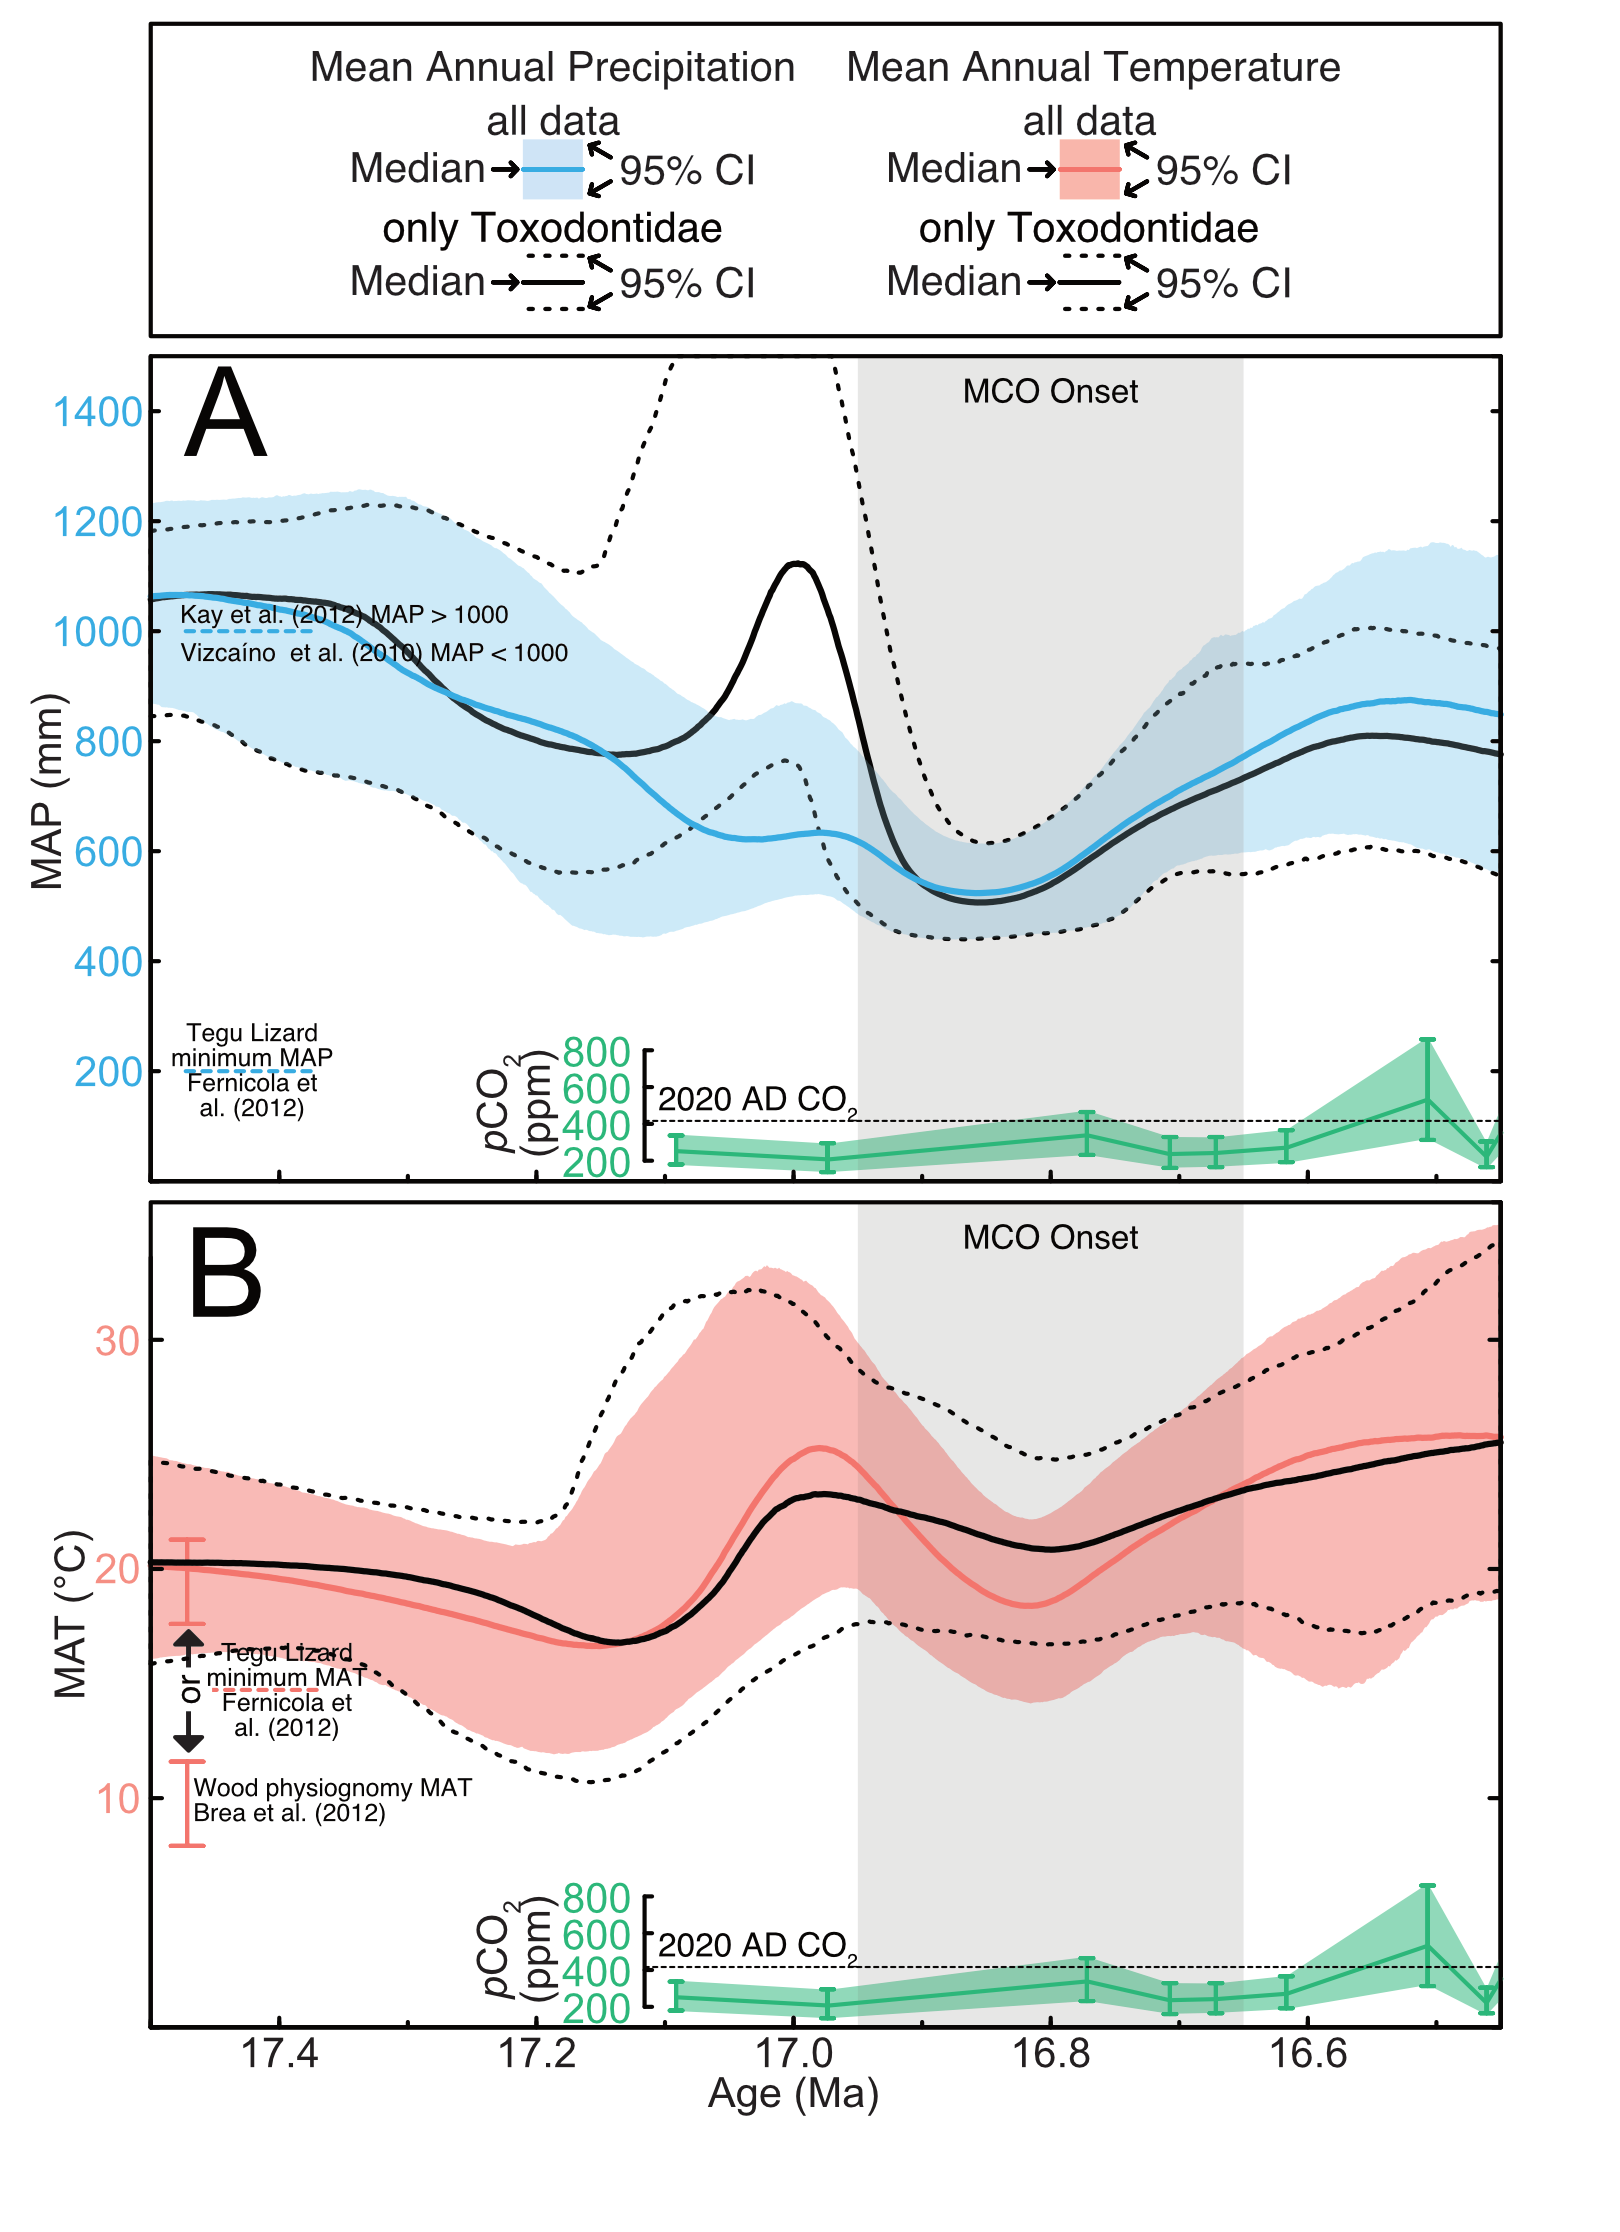 Mean annual precipitation and temperature modeled from the tooth enamel stable isotope compositions of Santa Cruz Formation Mammals